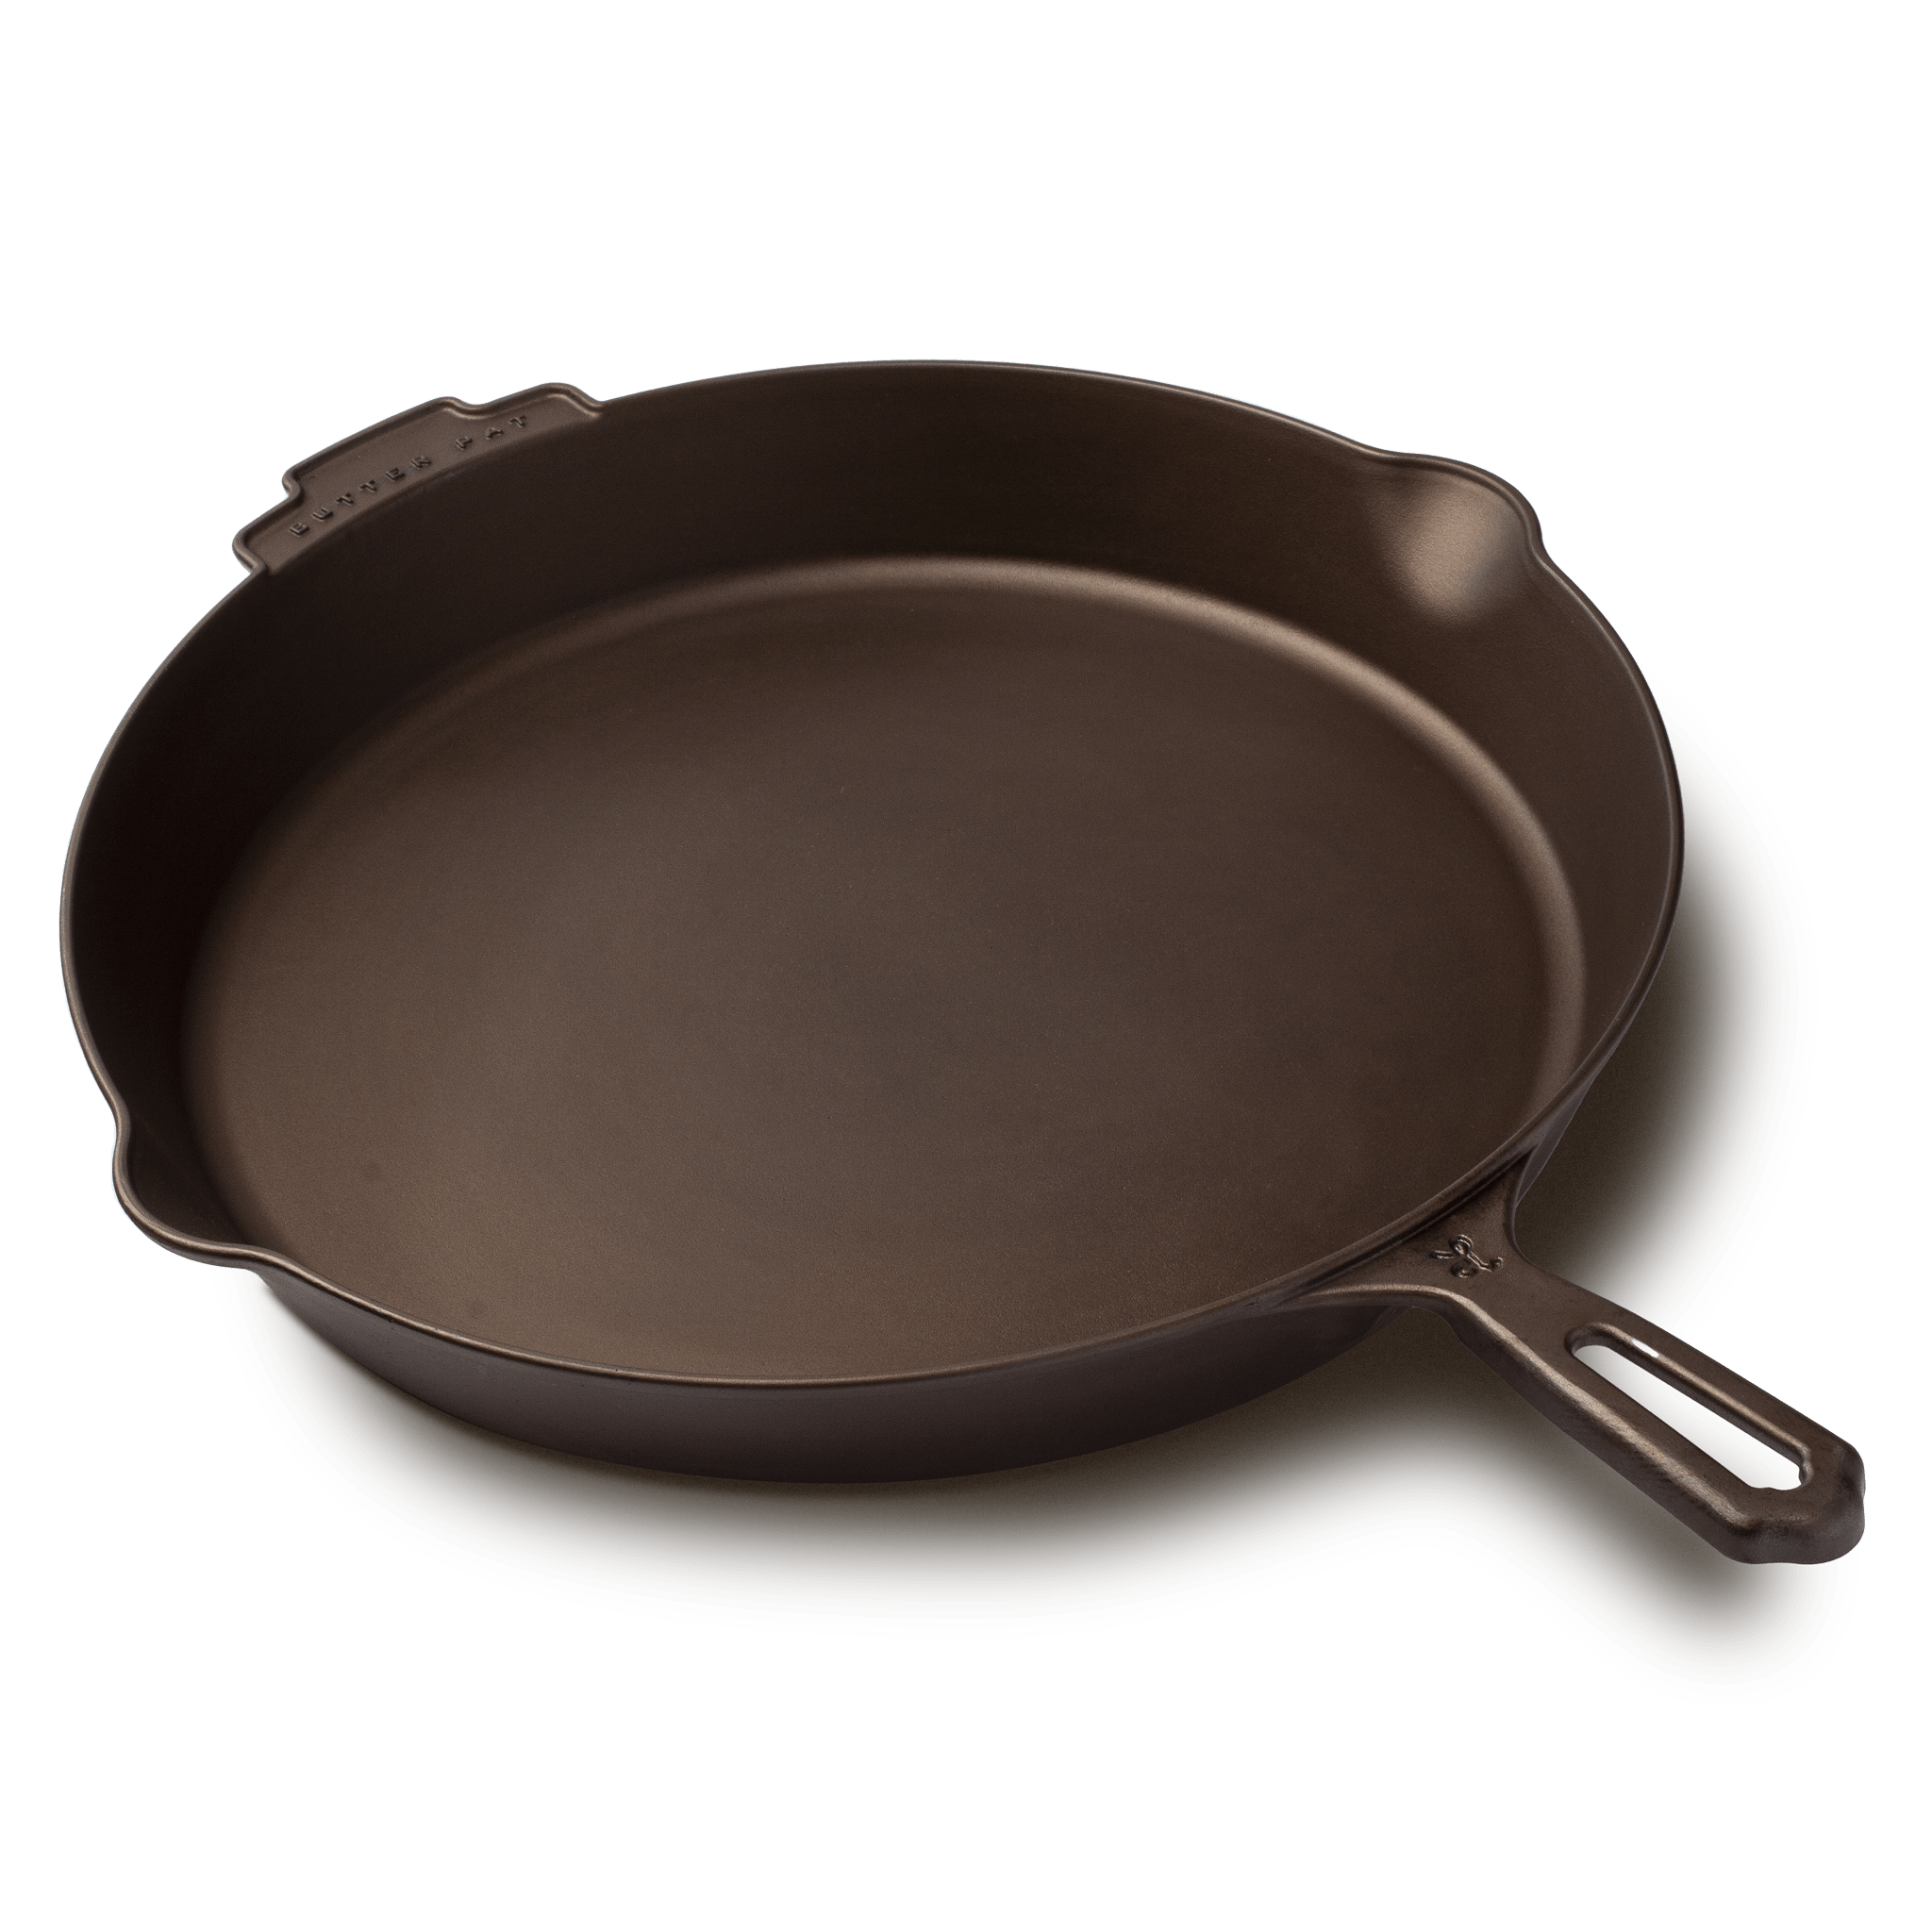 Cast Iron Pizza Pan Flat Skillet 14 Inch Grill Stove Campfire